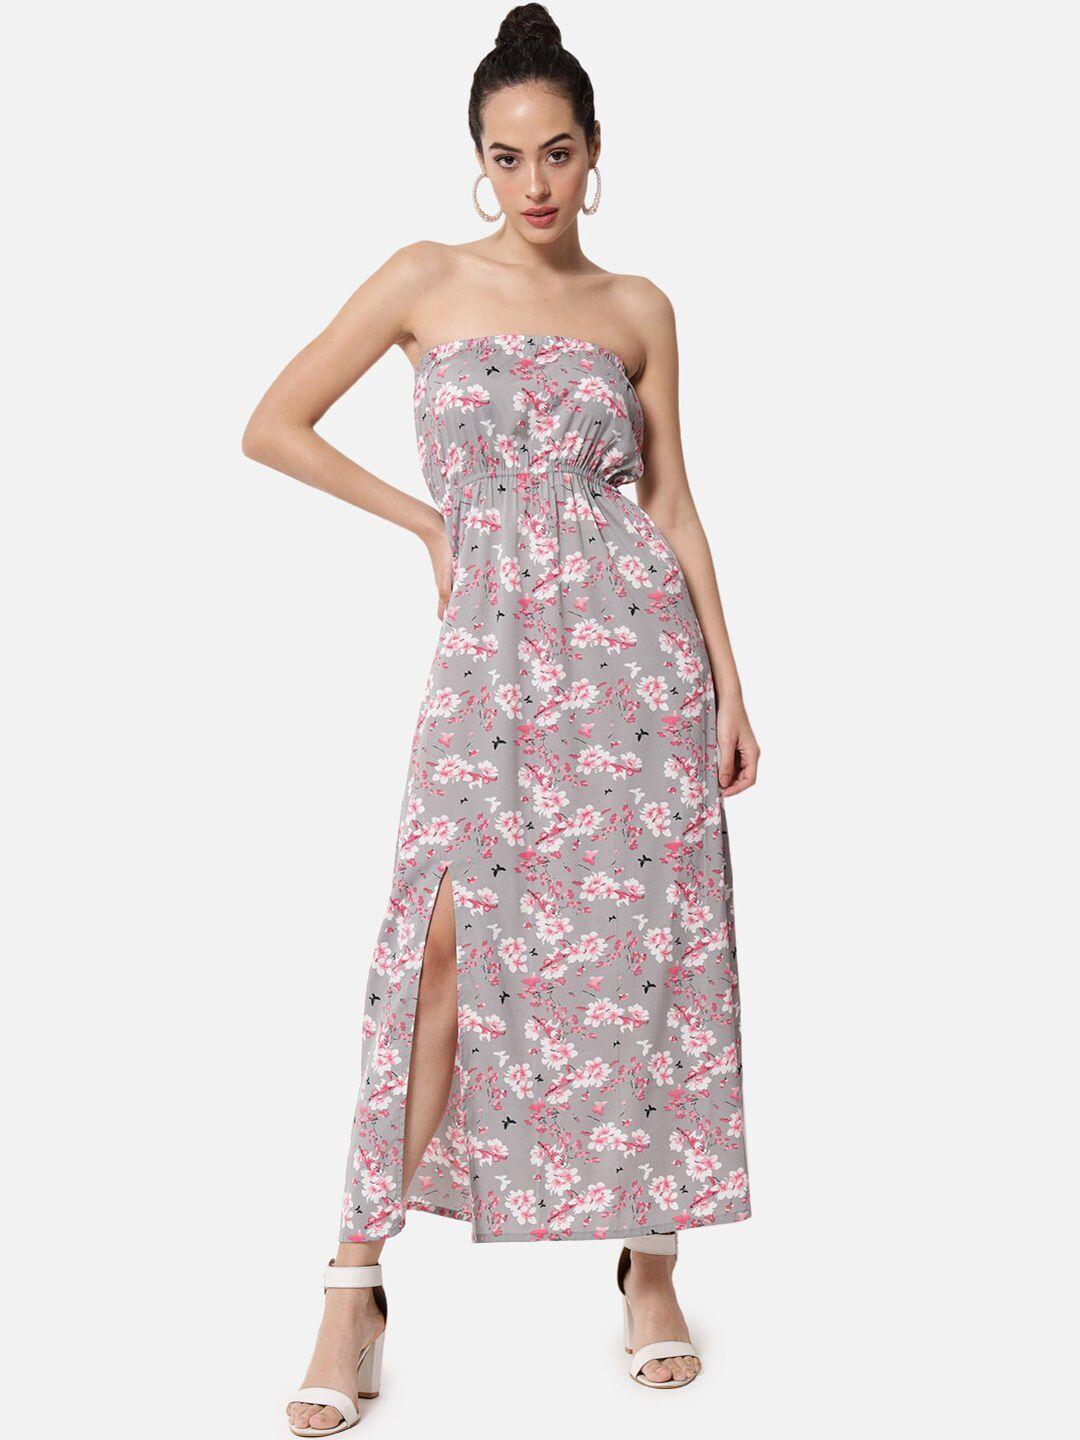 baesd-floral-printed-fit-&-flare-maxi-dress